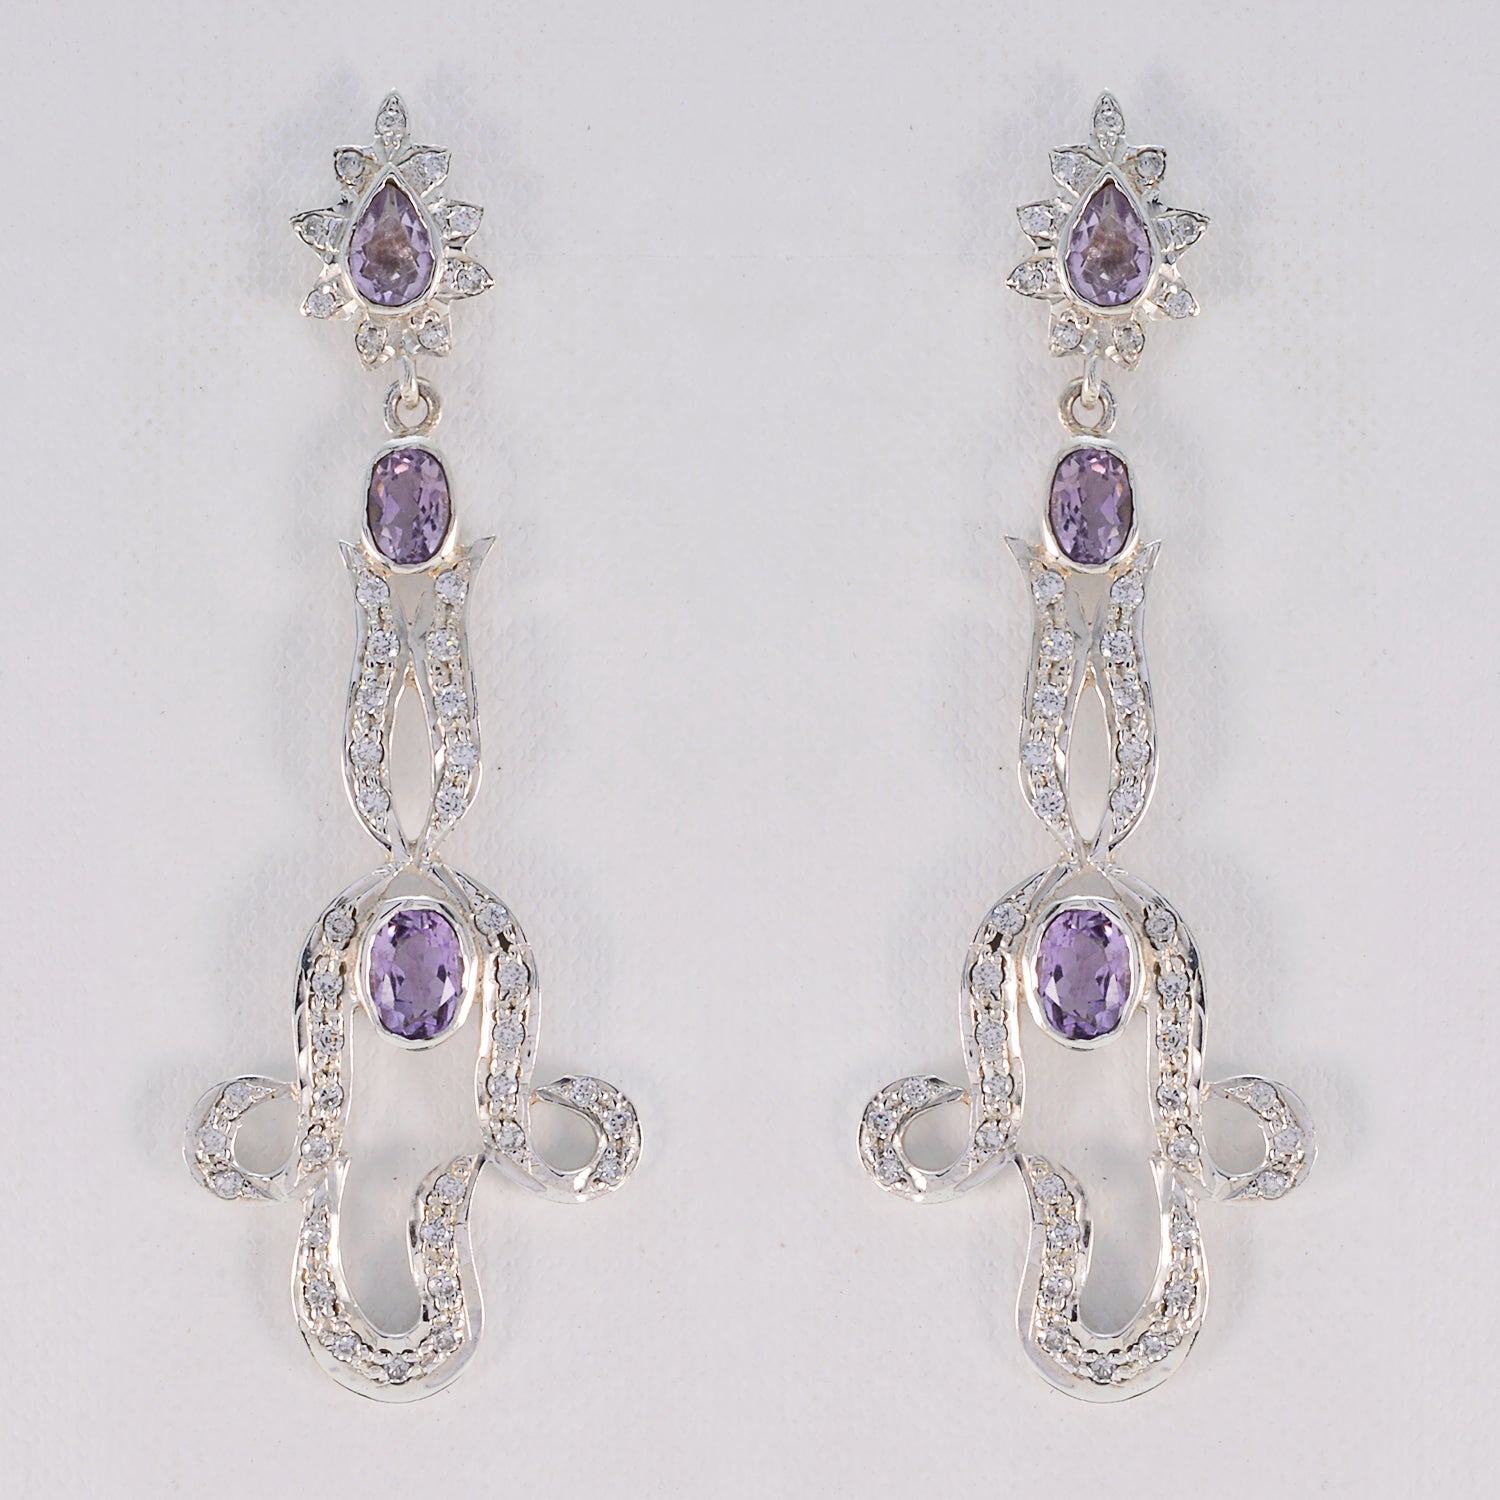 Riyo Real Gemstones oval Faceted Purple Amethyst Silver Earrings gift for valentine's day